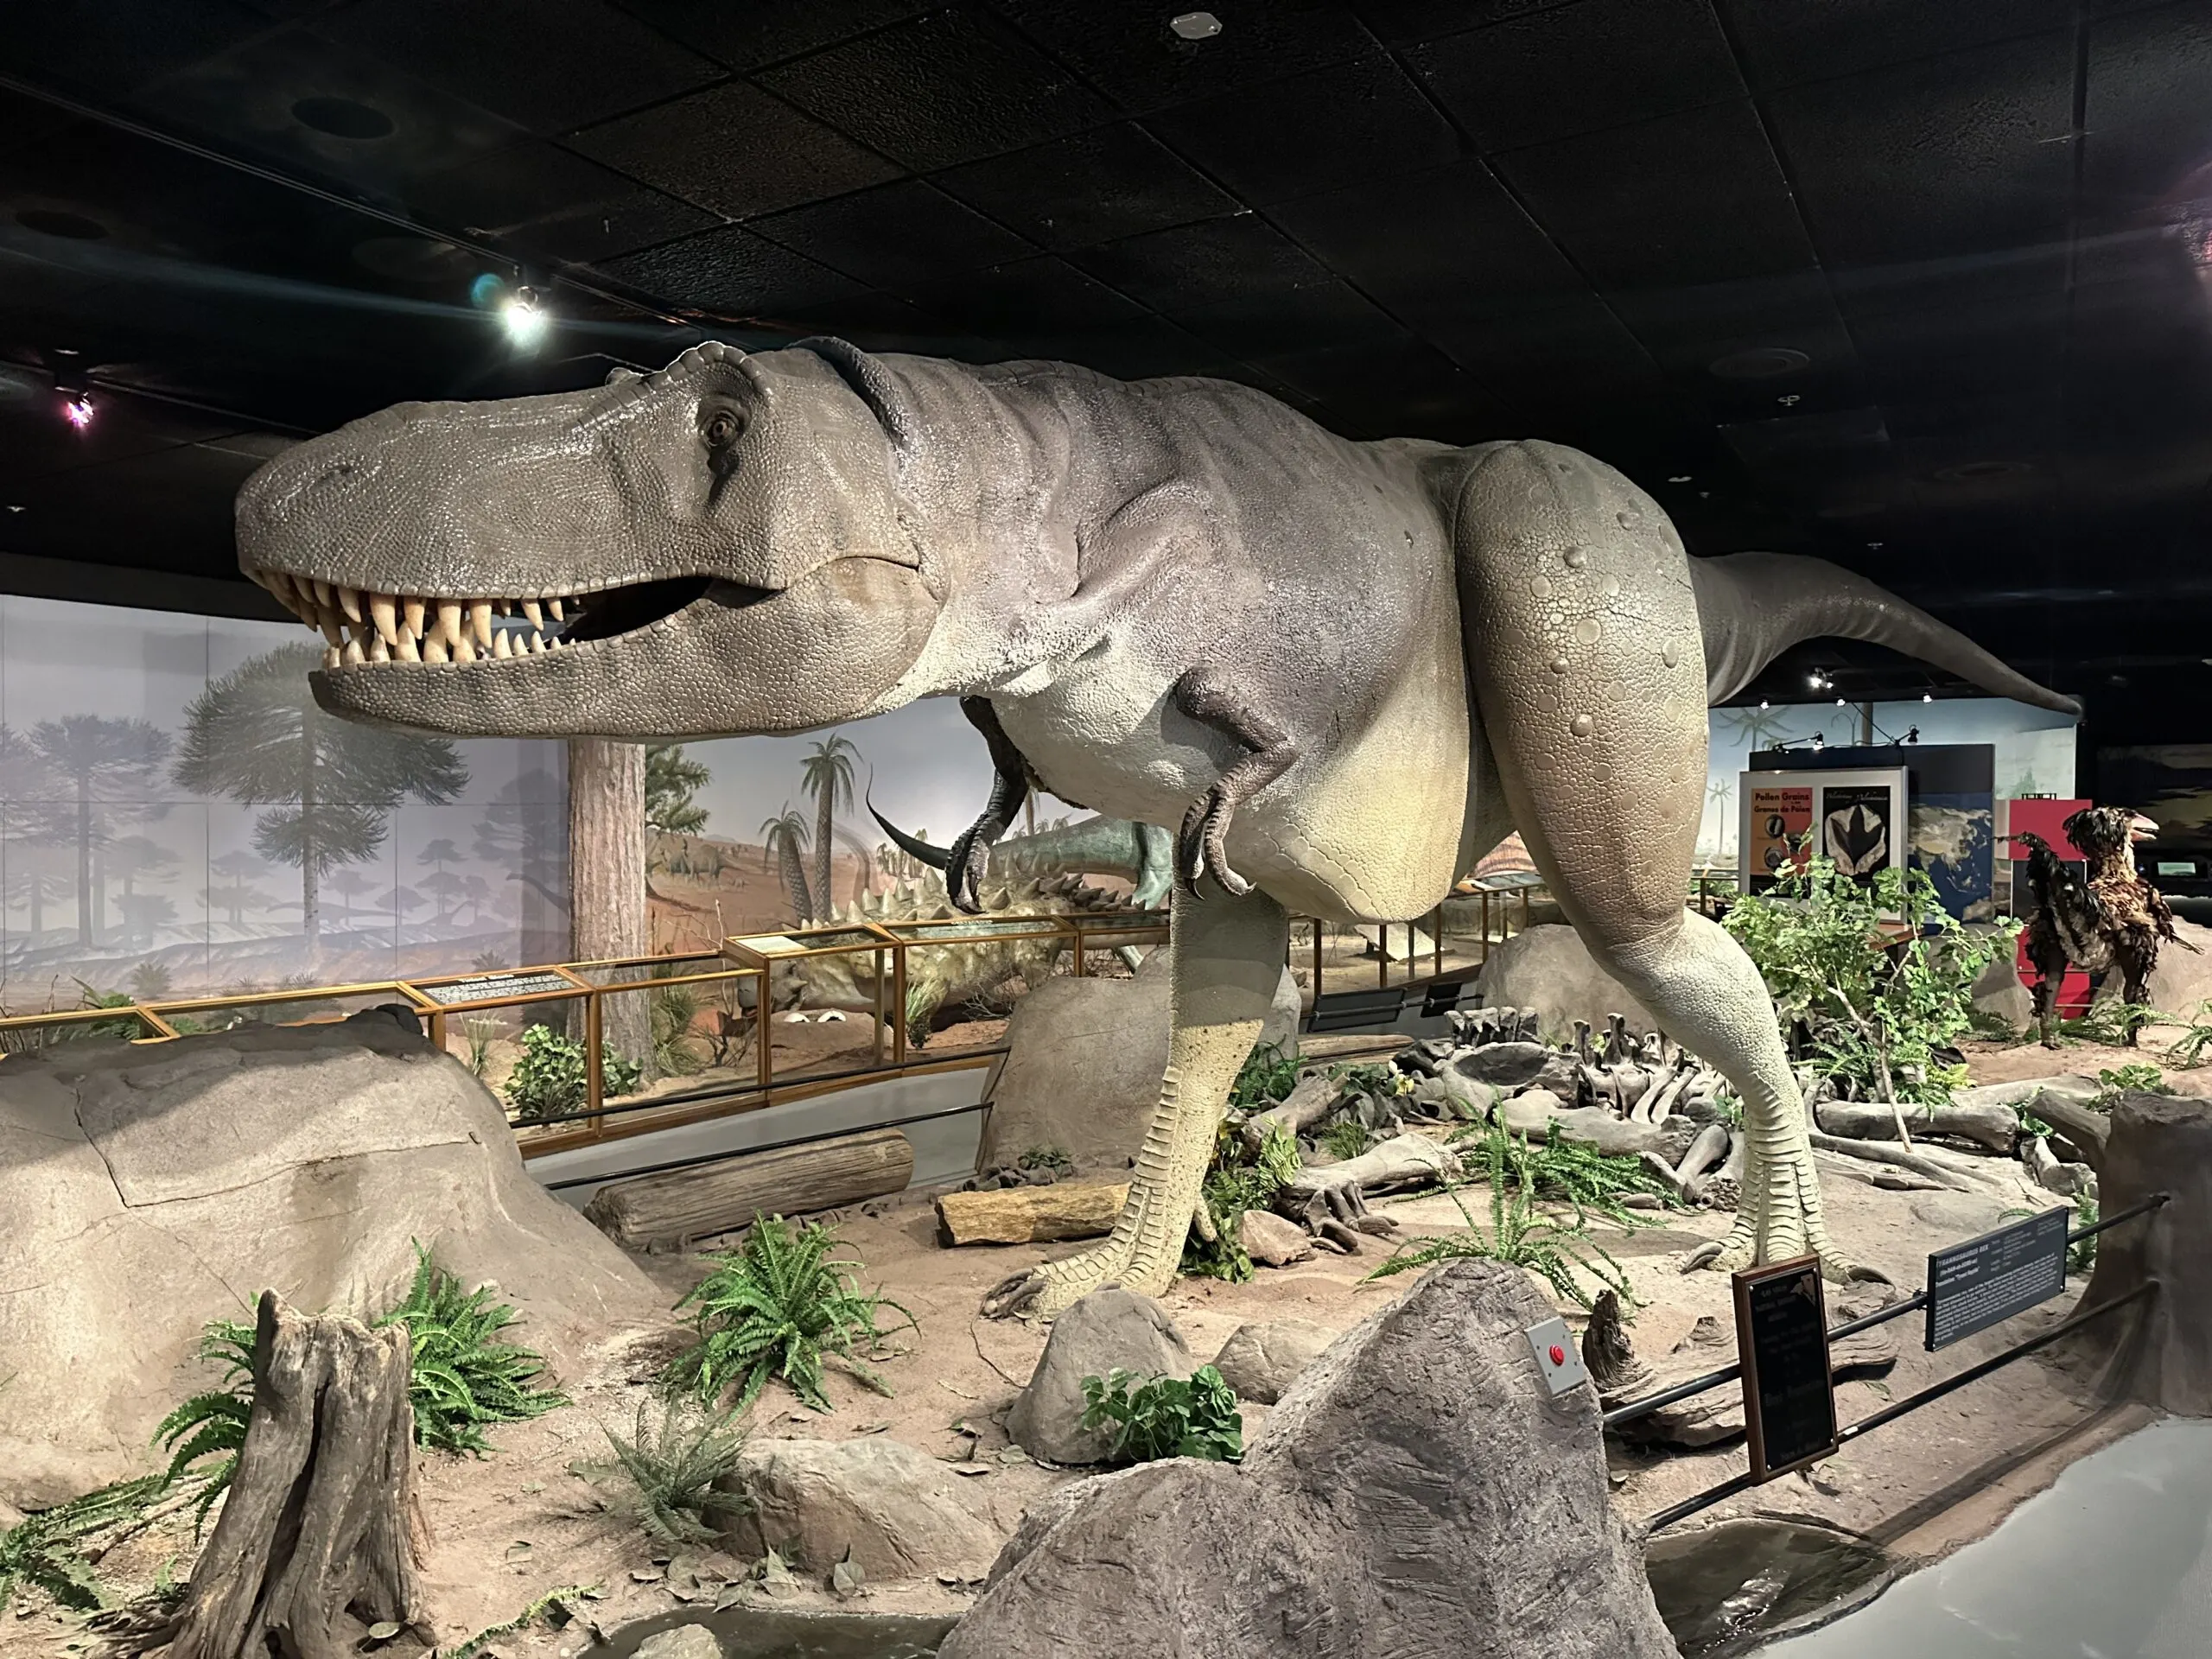 A life sized TRex figure stands tall in the middle of the dinosaur exhibit.